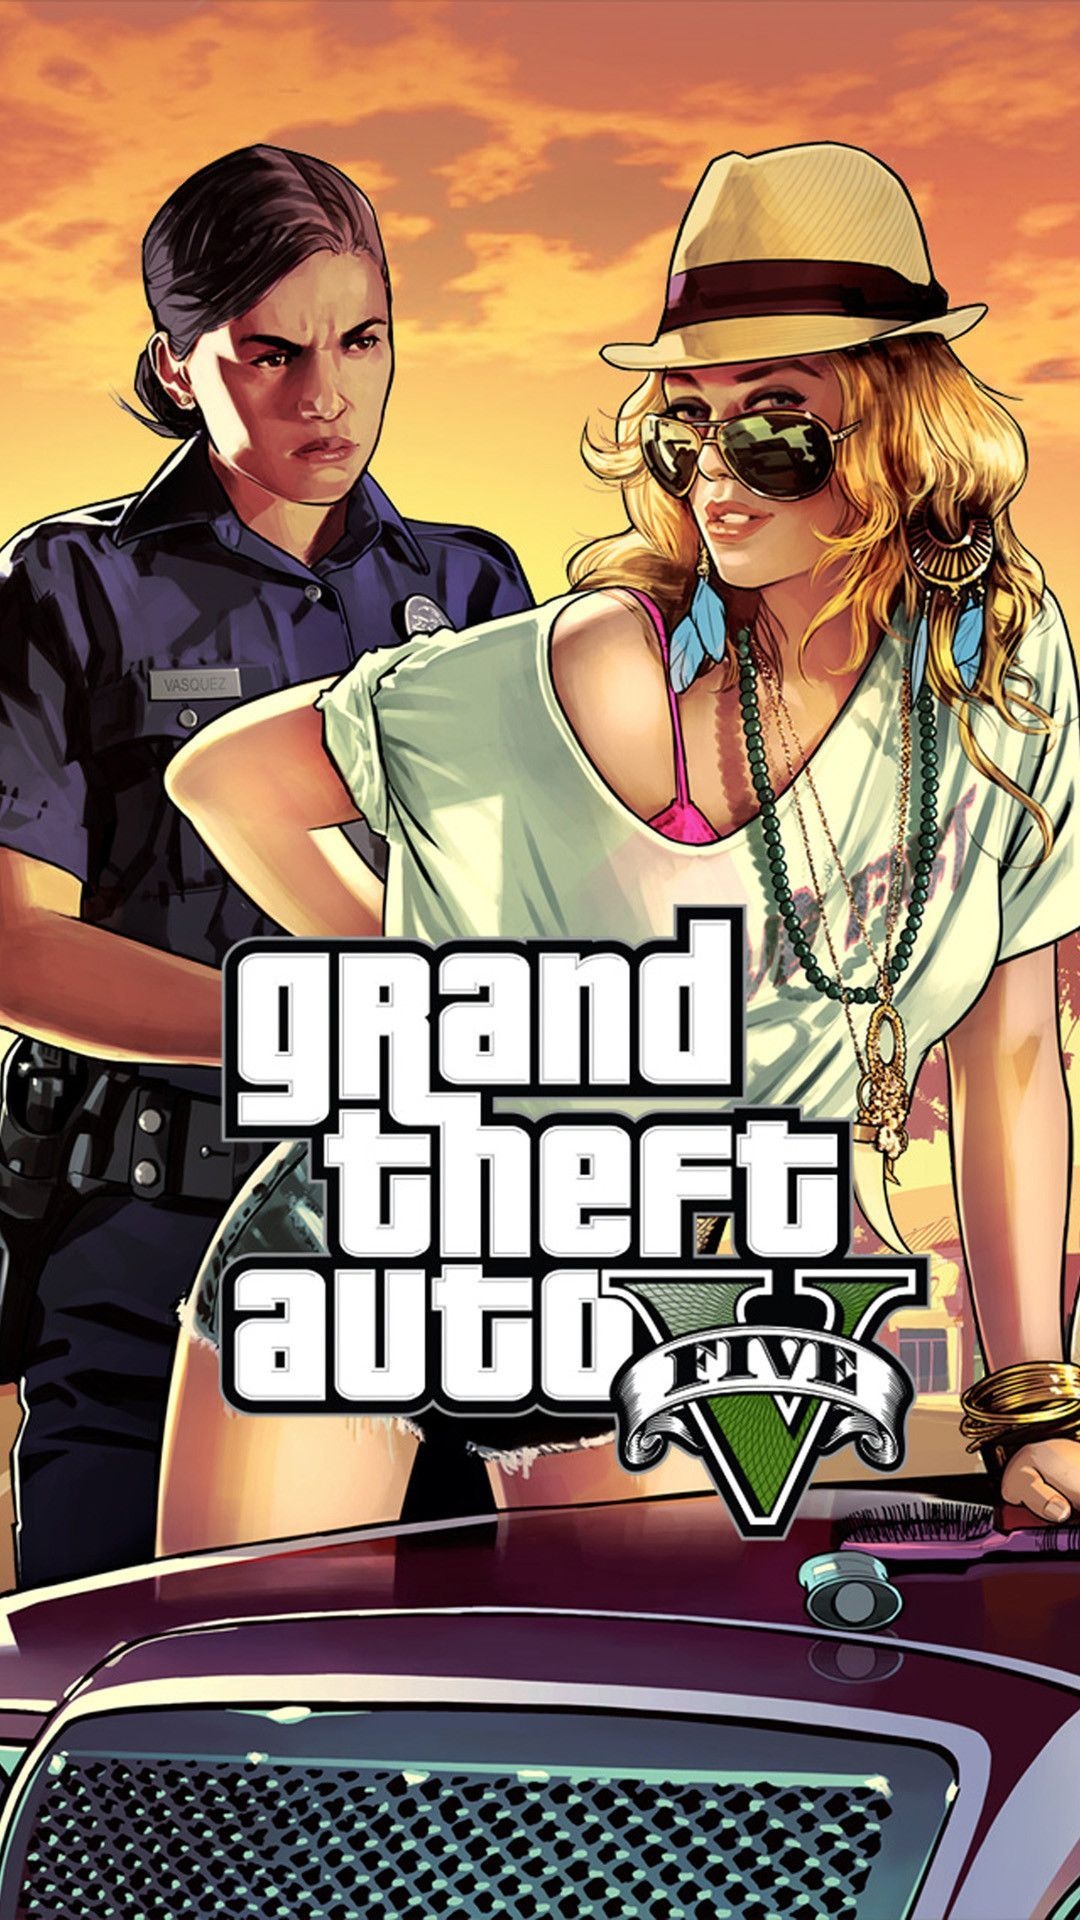 GTA wallpapers, Grand Theft Auto artwork, Gaming wallpapers, Action-packed gameplay, 1080x1920 Full HD Handy